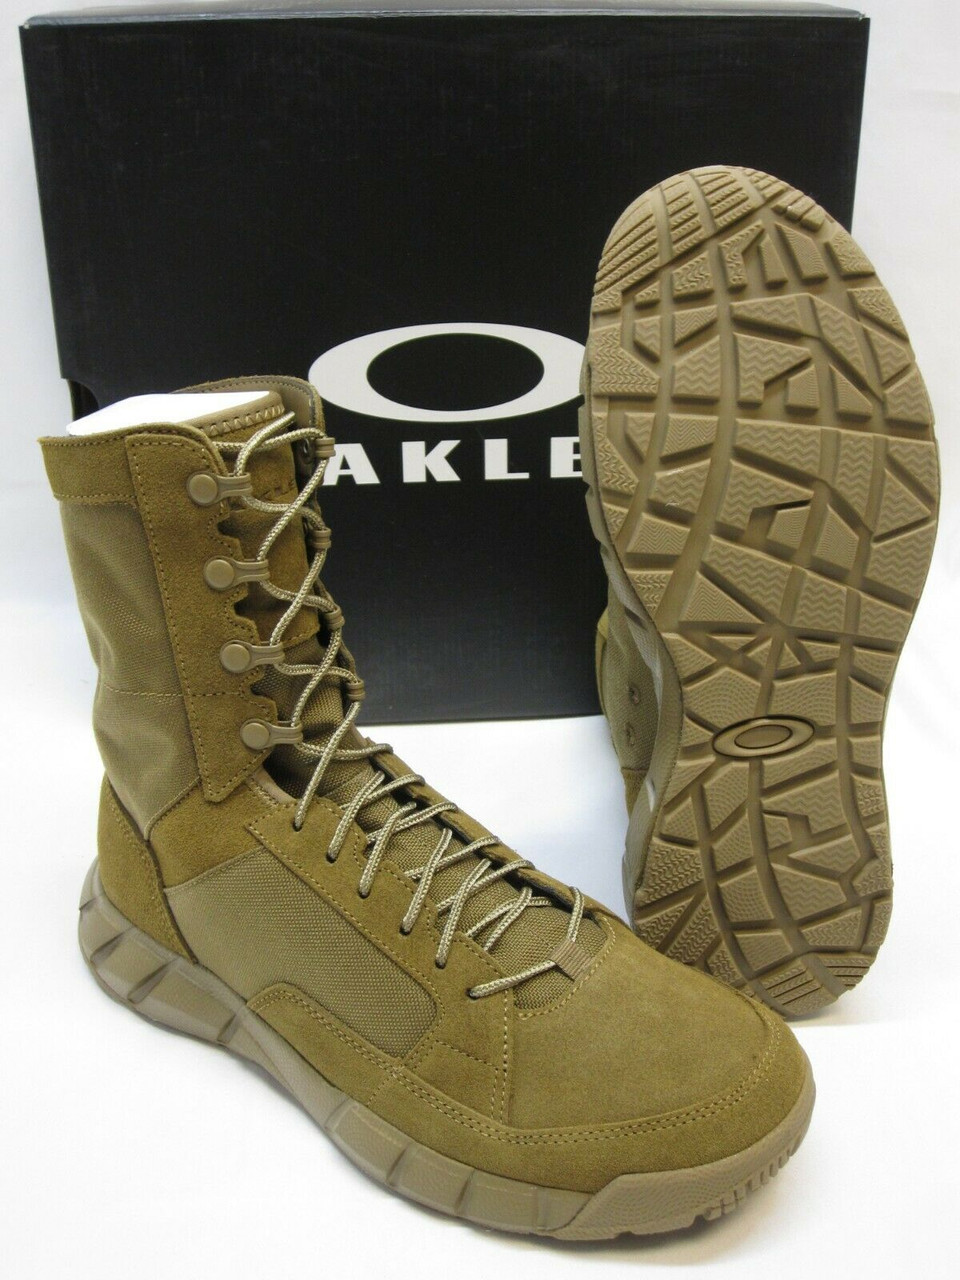 OAKLEY LT ASSAULT ARMY OCP MILITARY COMBAT BOOTS COYOTE BROWN TACTICAL ...